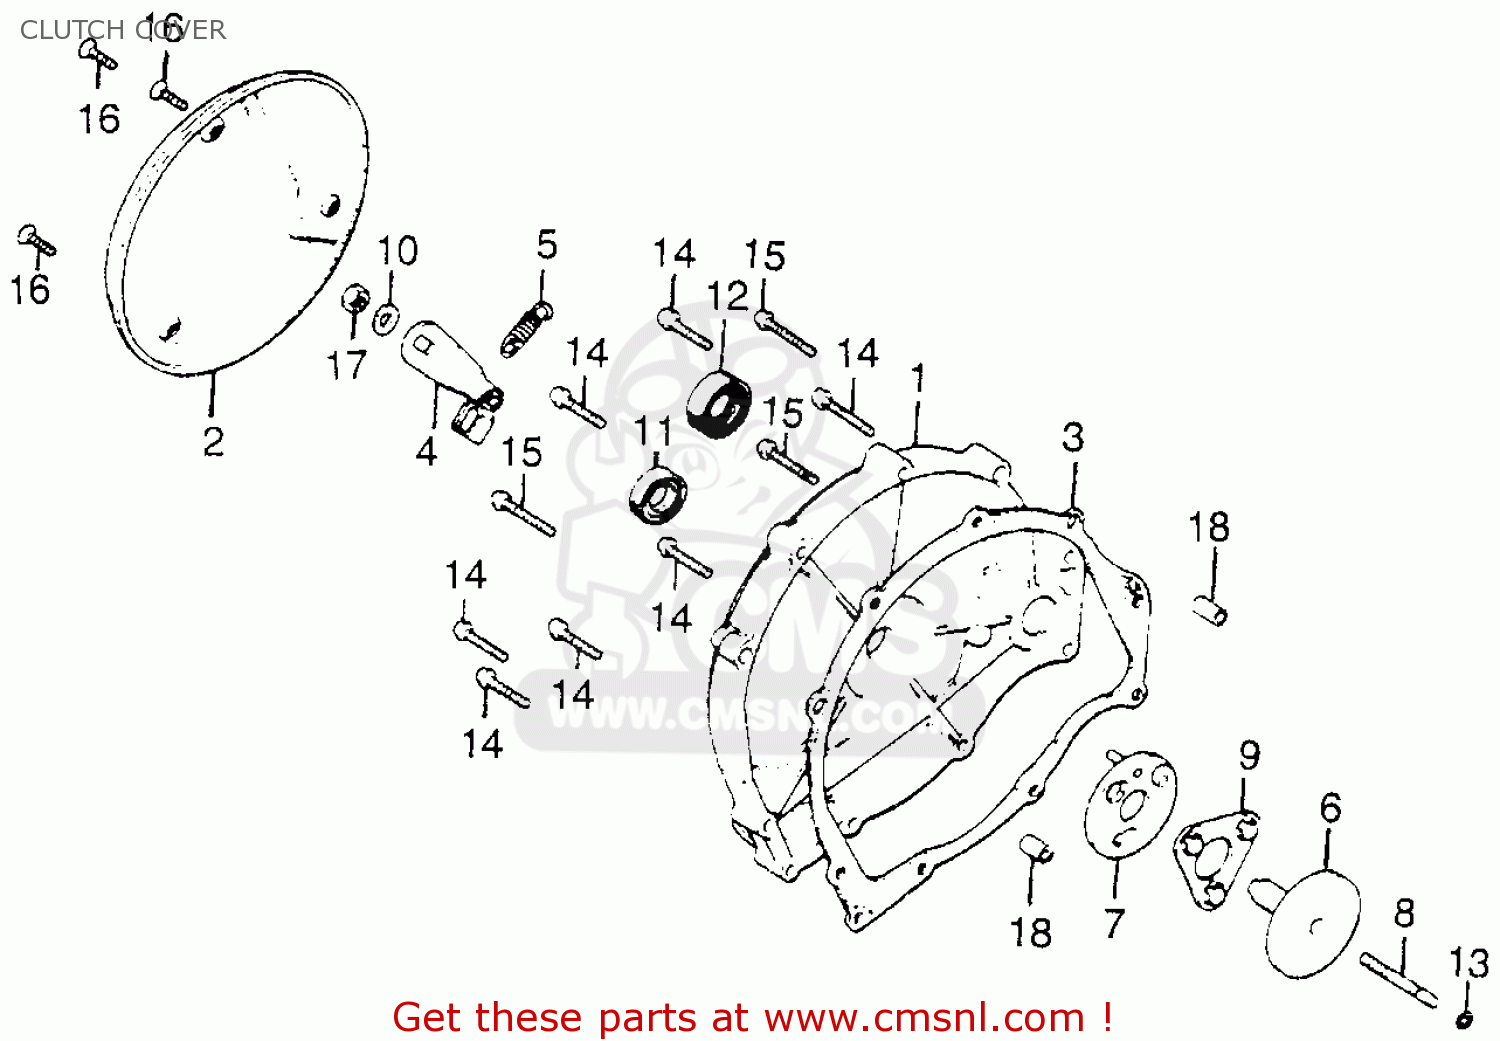 Freightliner Stereo Wiring Diagram from images.cmsnl.com